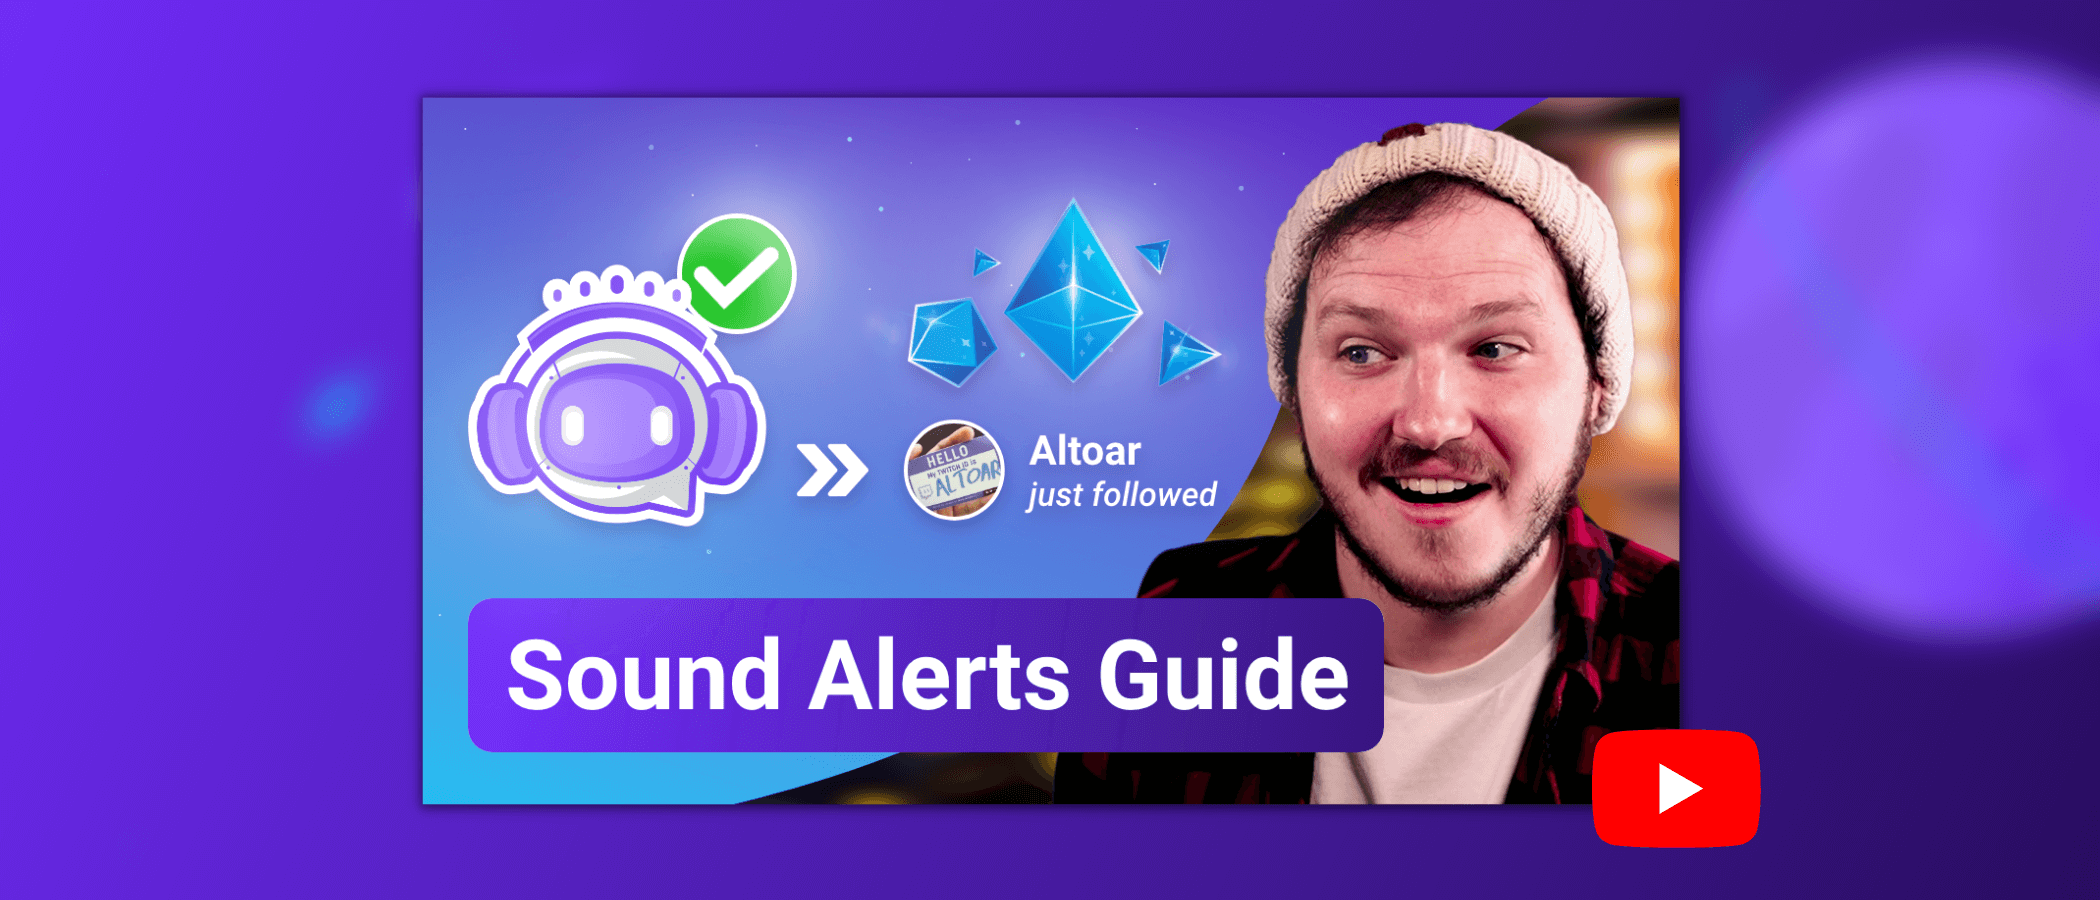 This image shows the thumbnail of the Sound Alerts video setup guide.